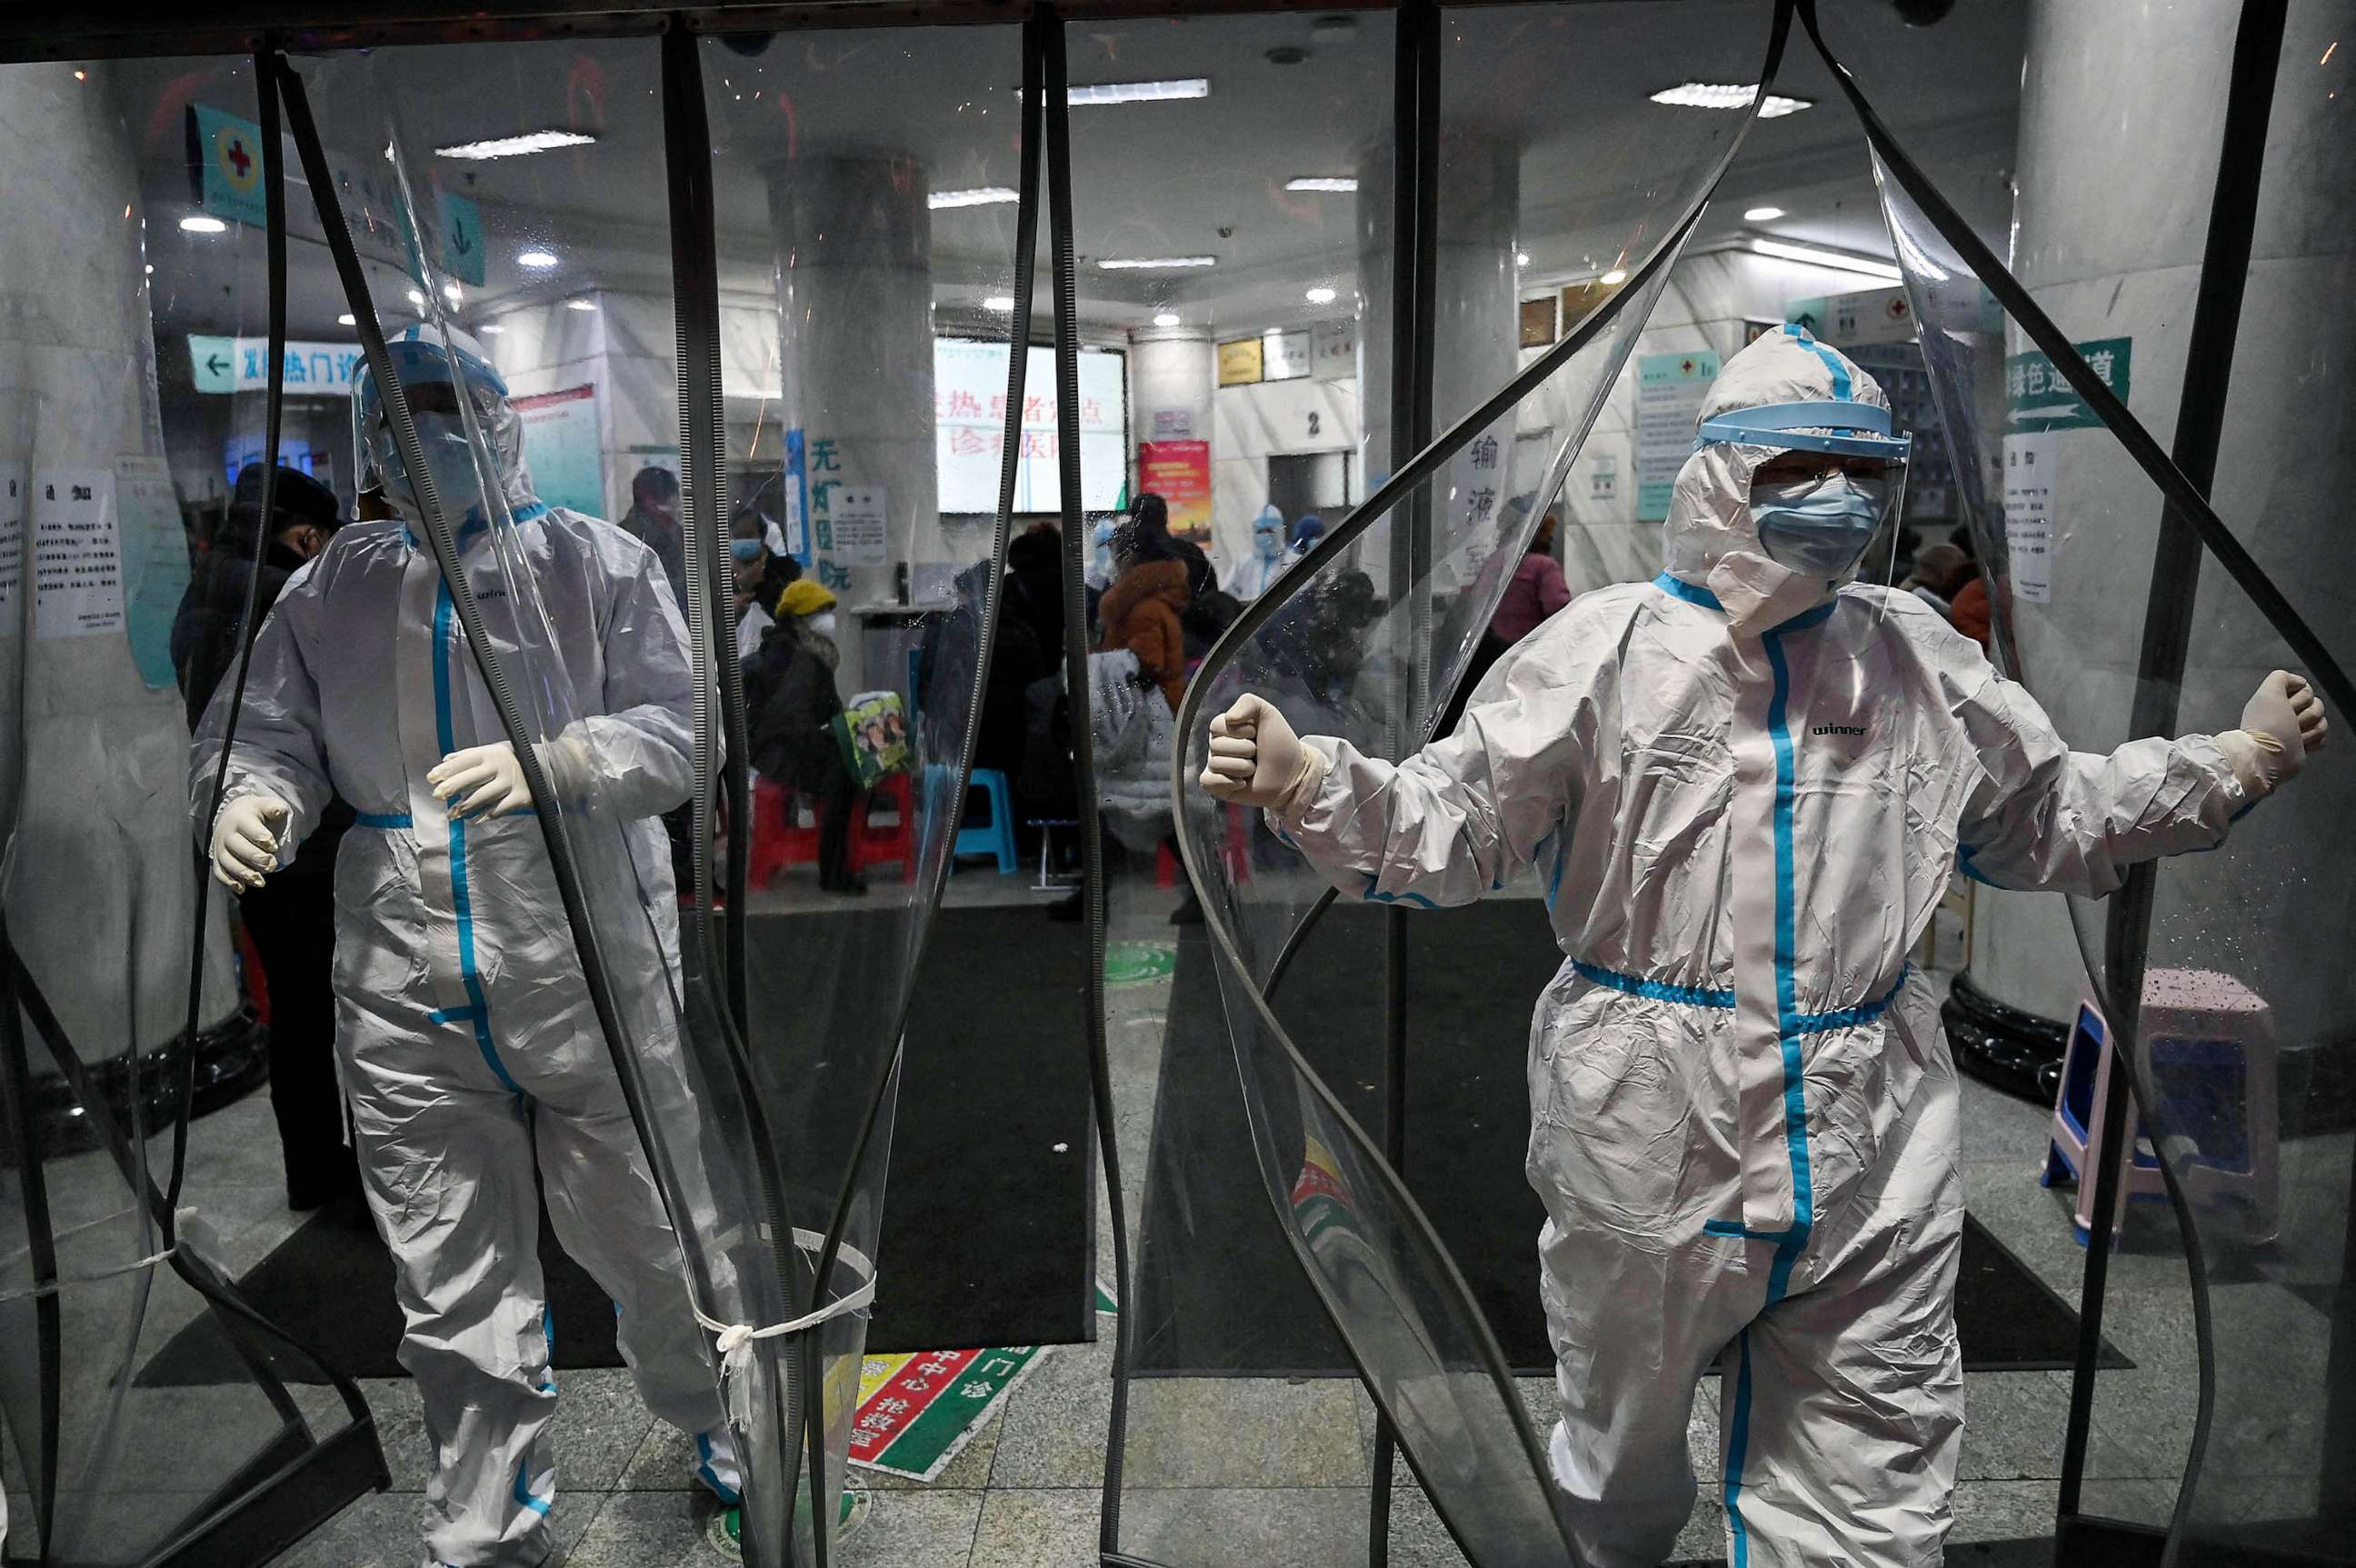 PHOTO: FILE - This file photo taken on Jan. 25, 2020 shows medical staff members, wearing protective clothing at the Wuhan Red Cross Hospital in Wuhan, as the city struggled with the outbreak of the once-mysterious virus.